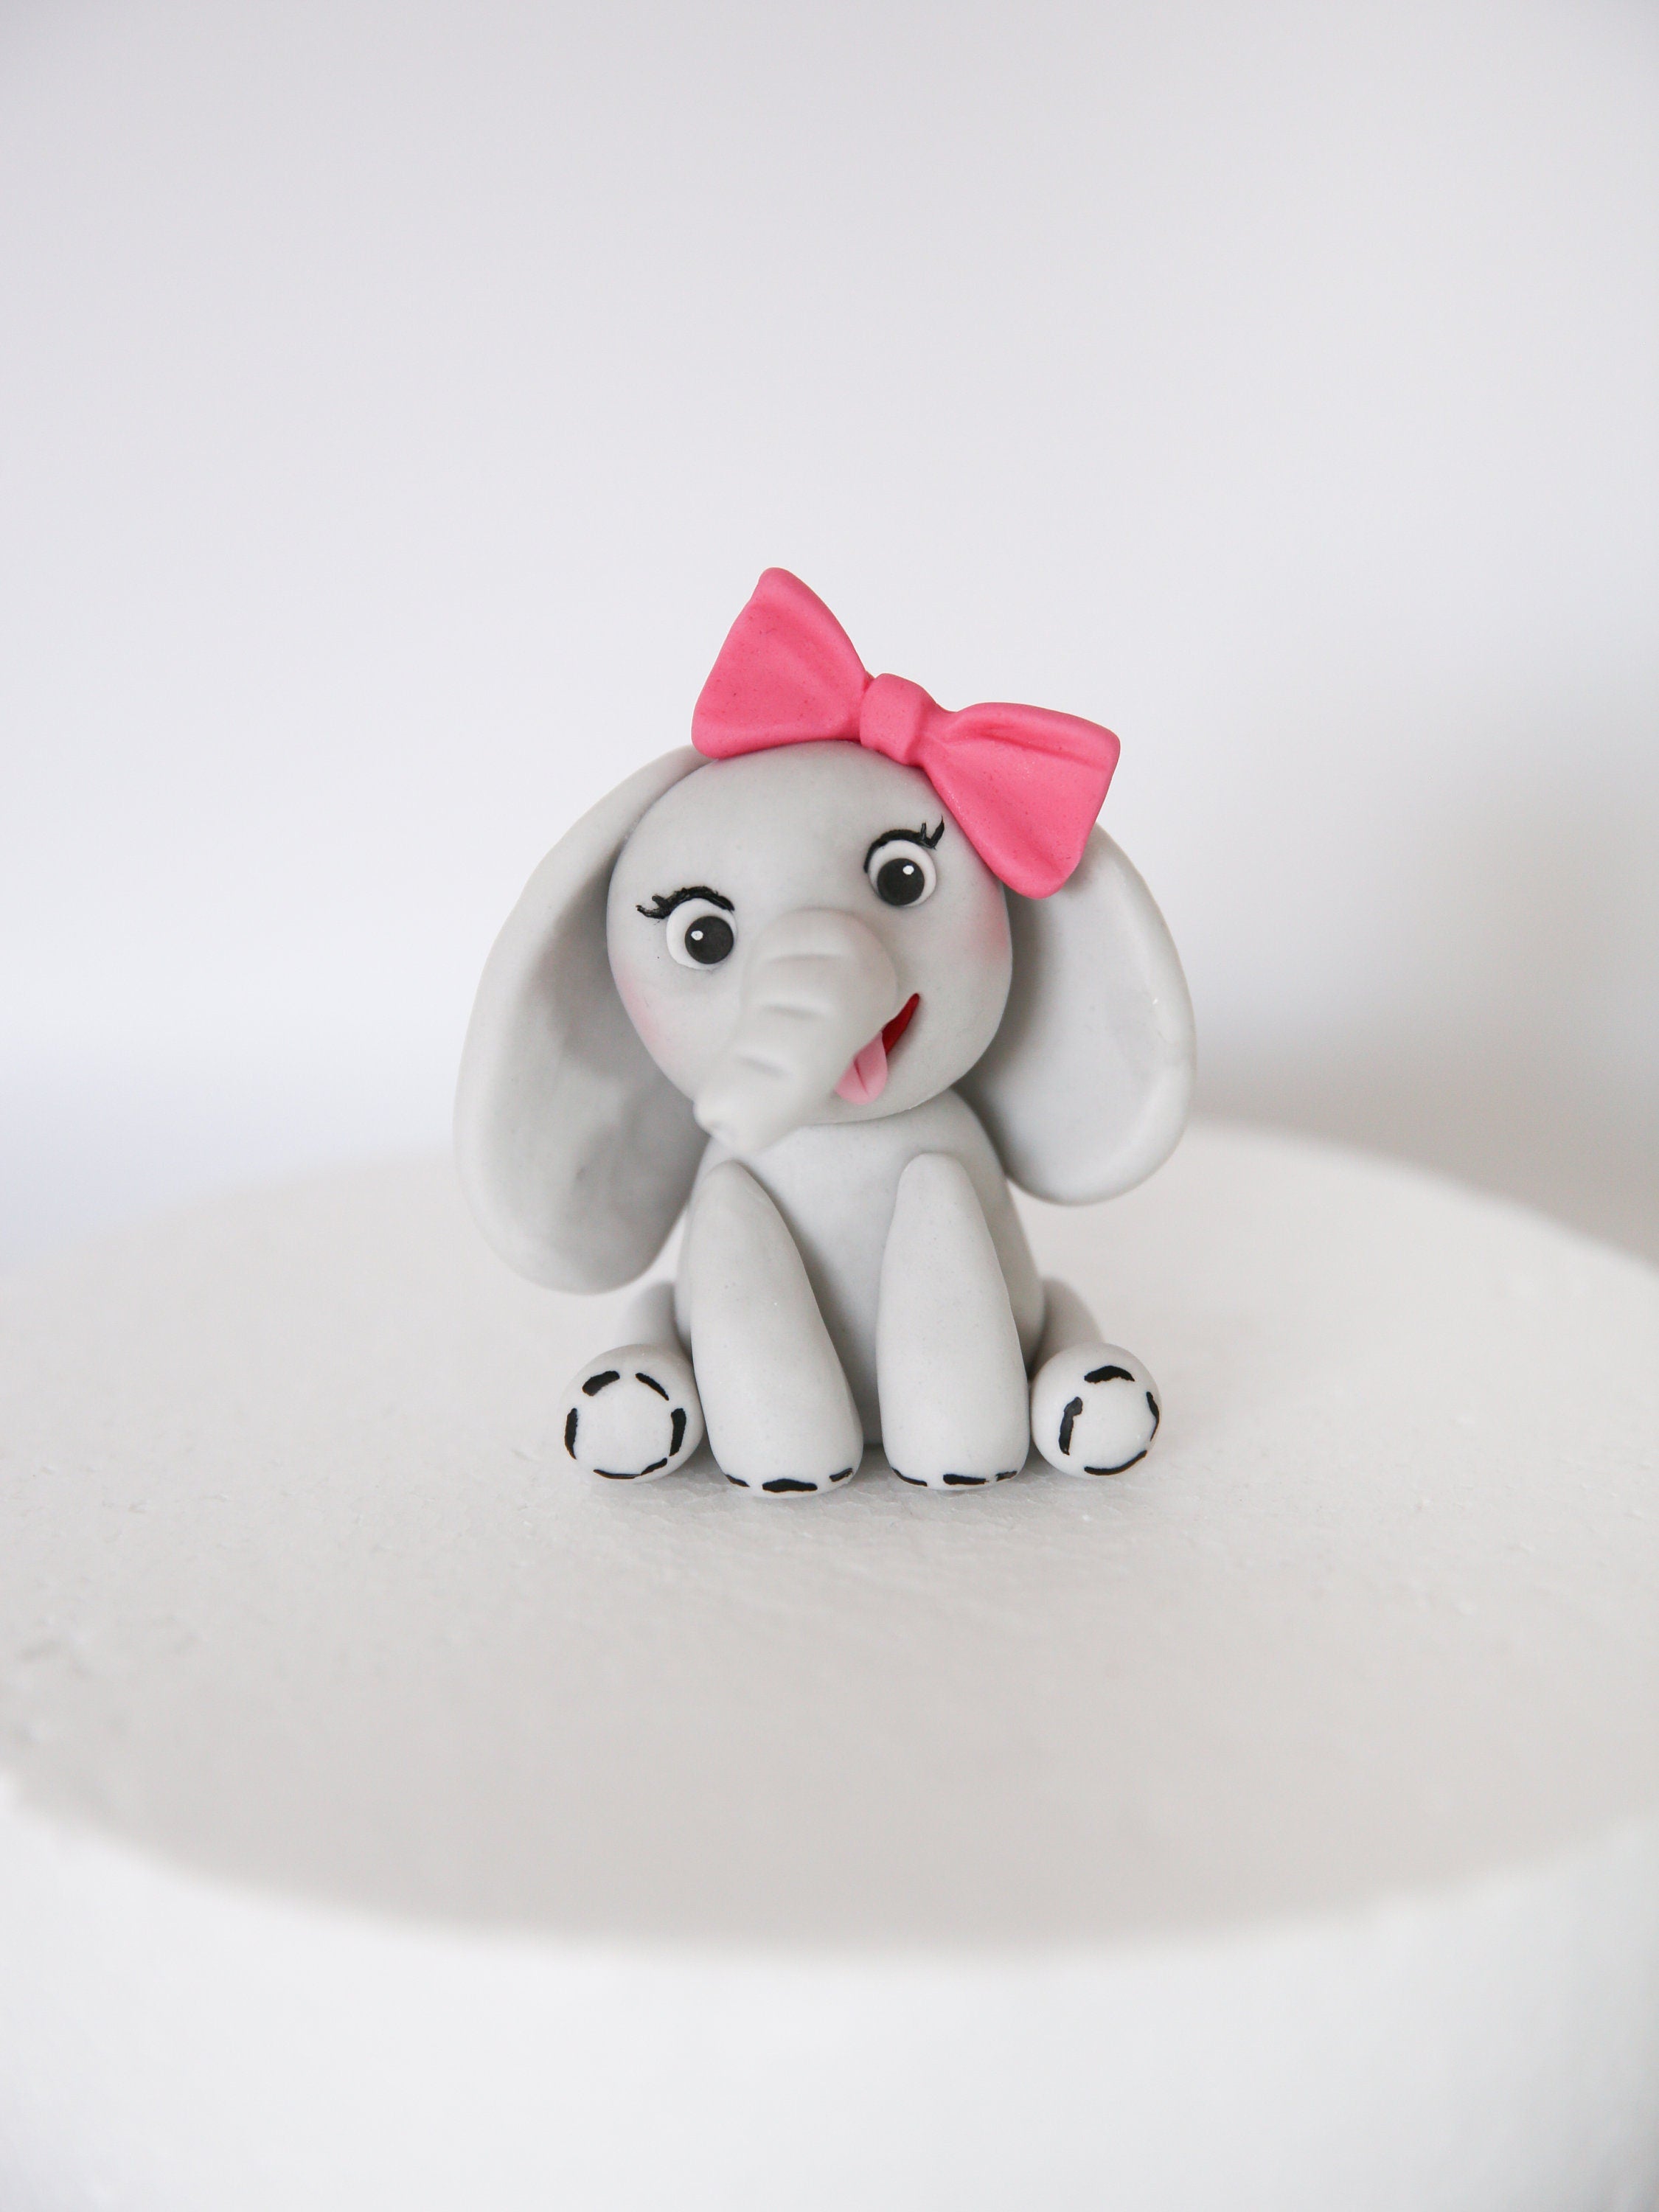 HOW TO MAKE A CUTE FONDANT LION CAKE TOPPER TUTORIAL |  INTHEKITCHENWITHELISA - YouTube